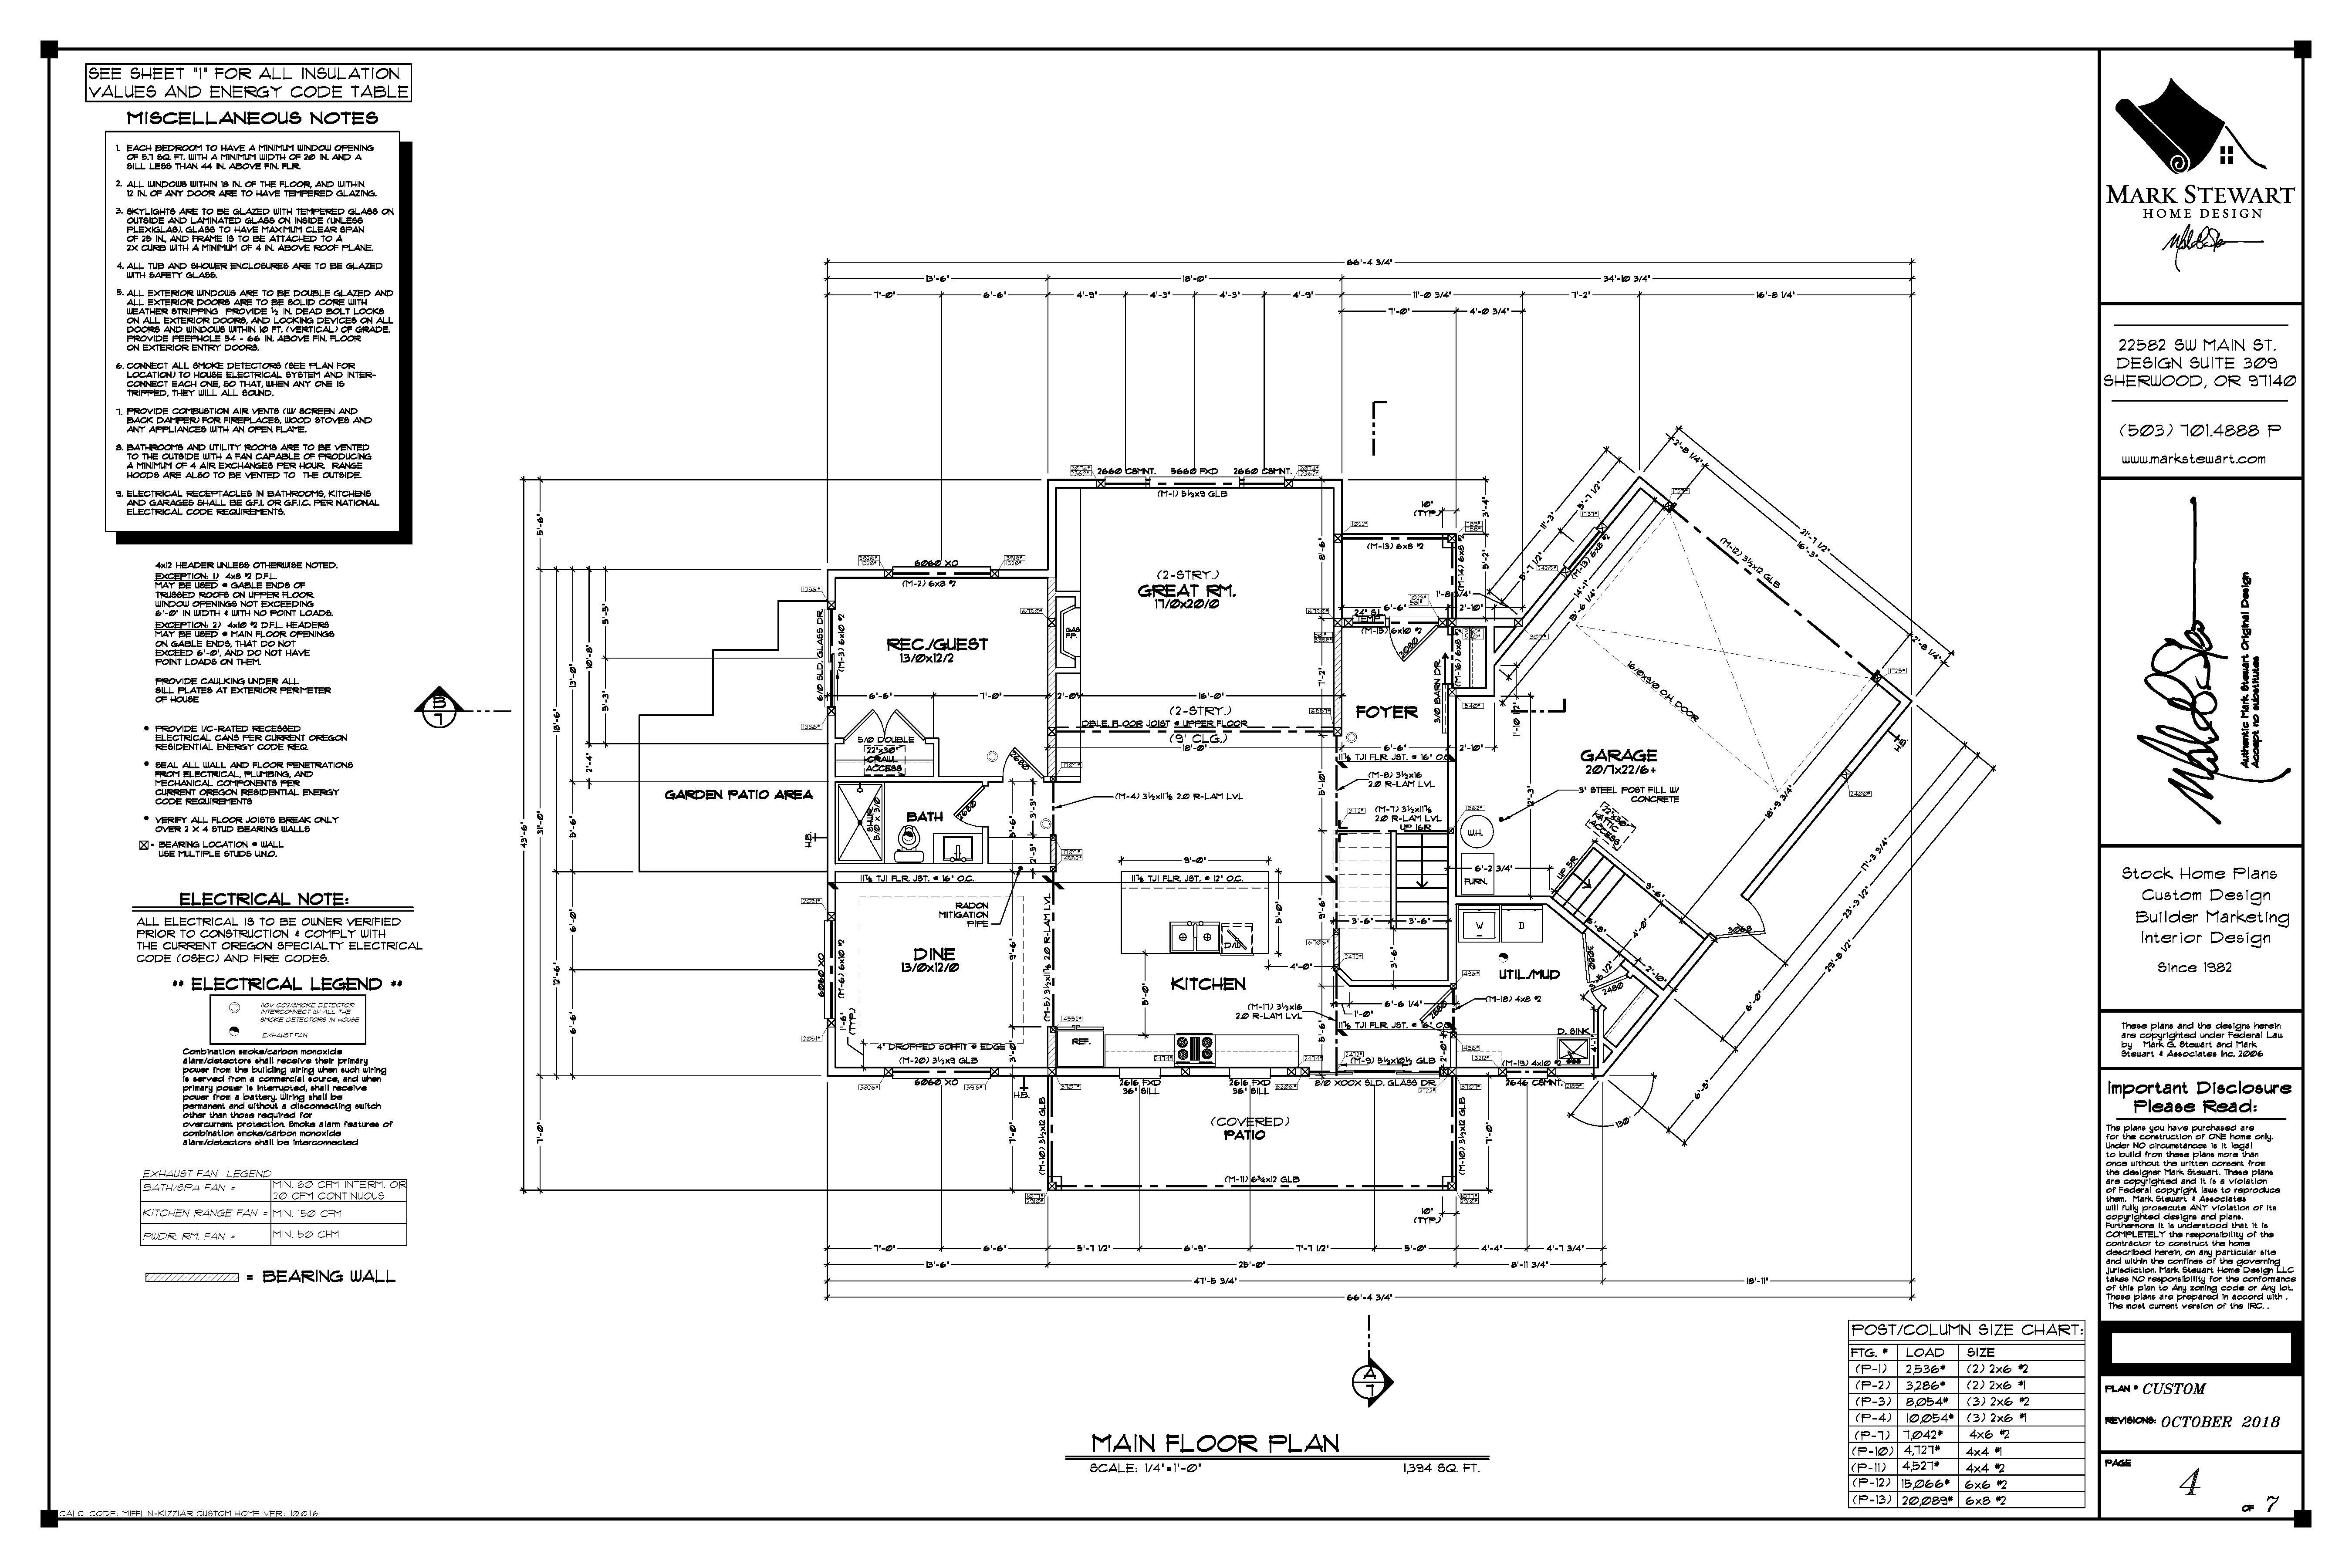 What is included in a Set of Working Drawings  Best Selling House Plans by  Mark Stewart Home Design